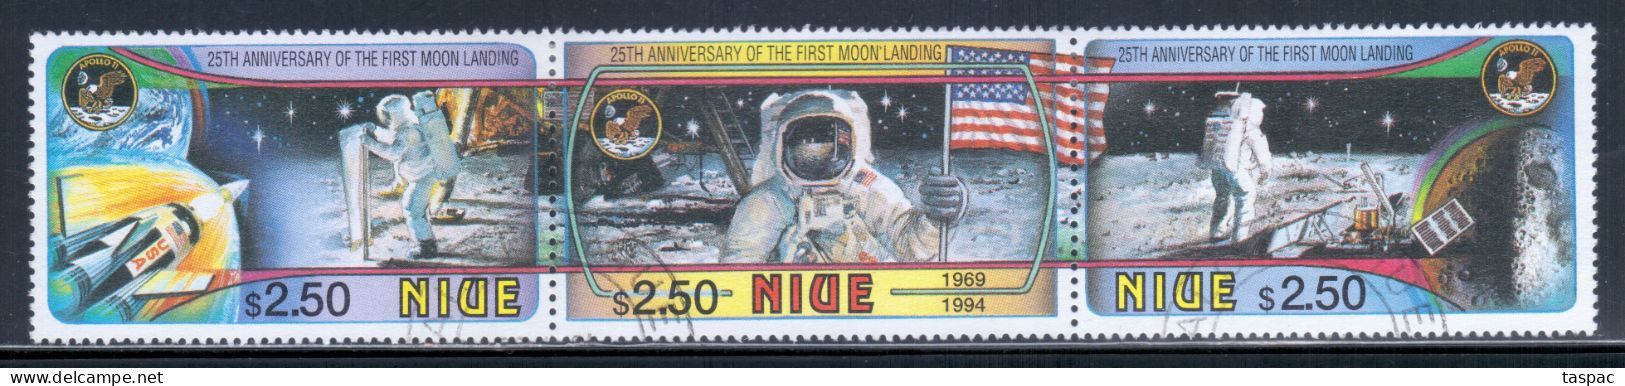 Niue 1994 Mi# 842-844 Used - Strip Of 3 - First Manned Moon Landing, 25th Anniv. / Space - Ozeanien